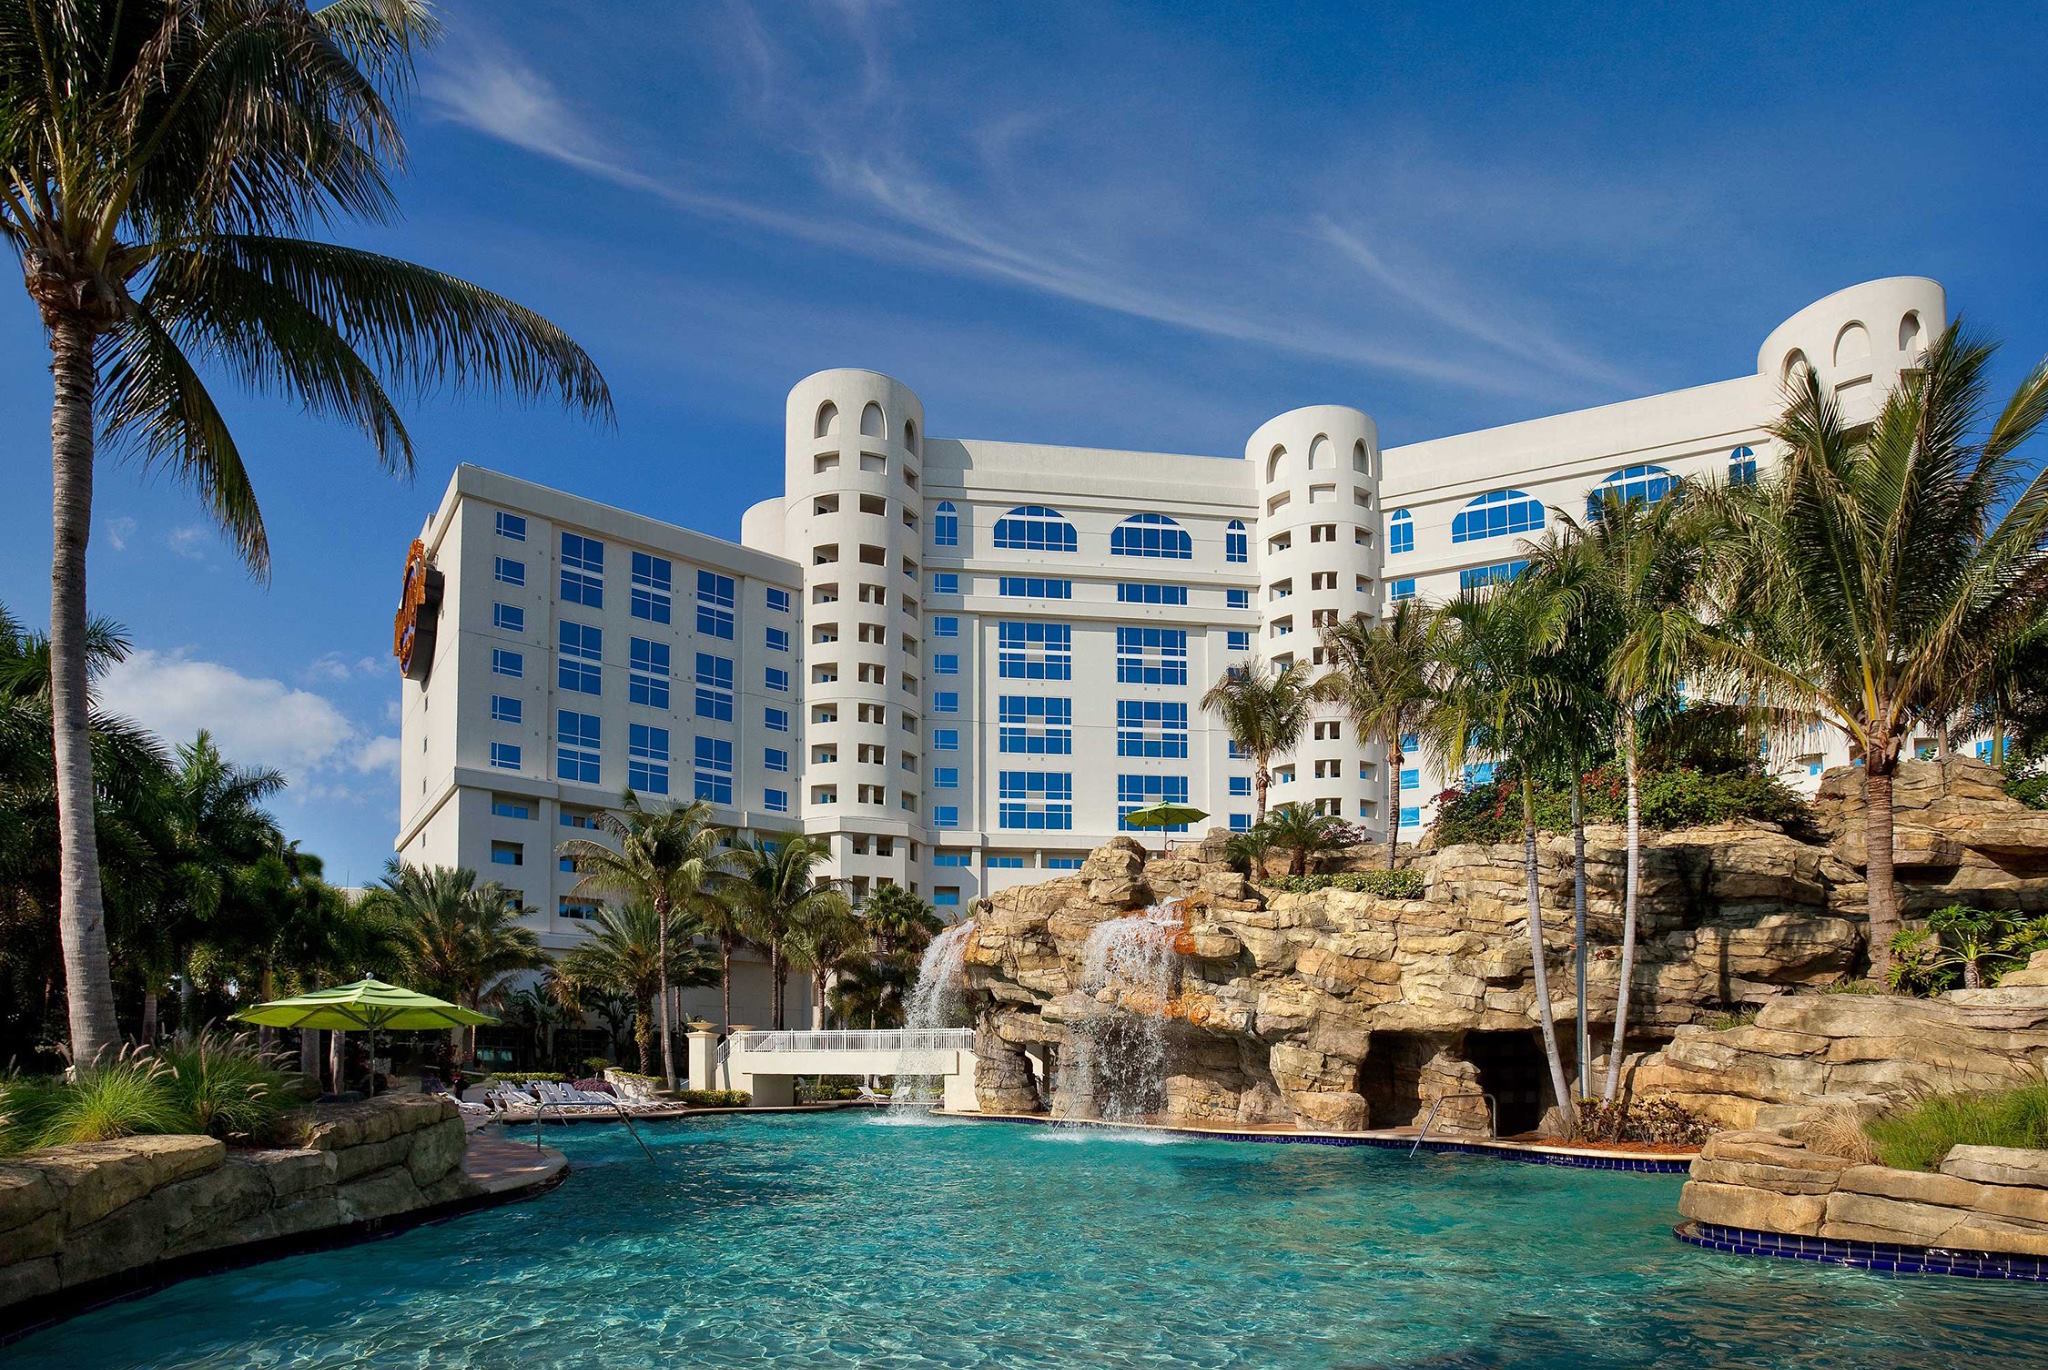 Seminole Tribe drops motion after gaming revenues published